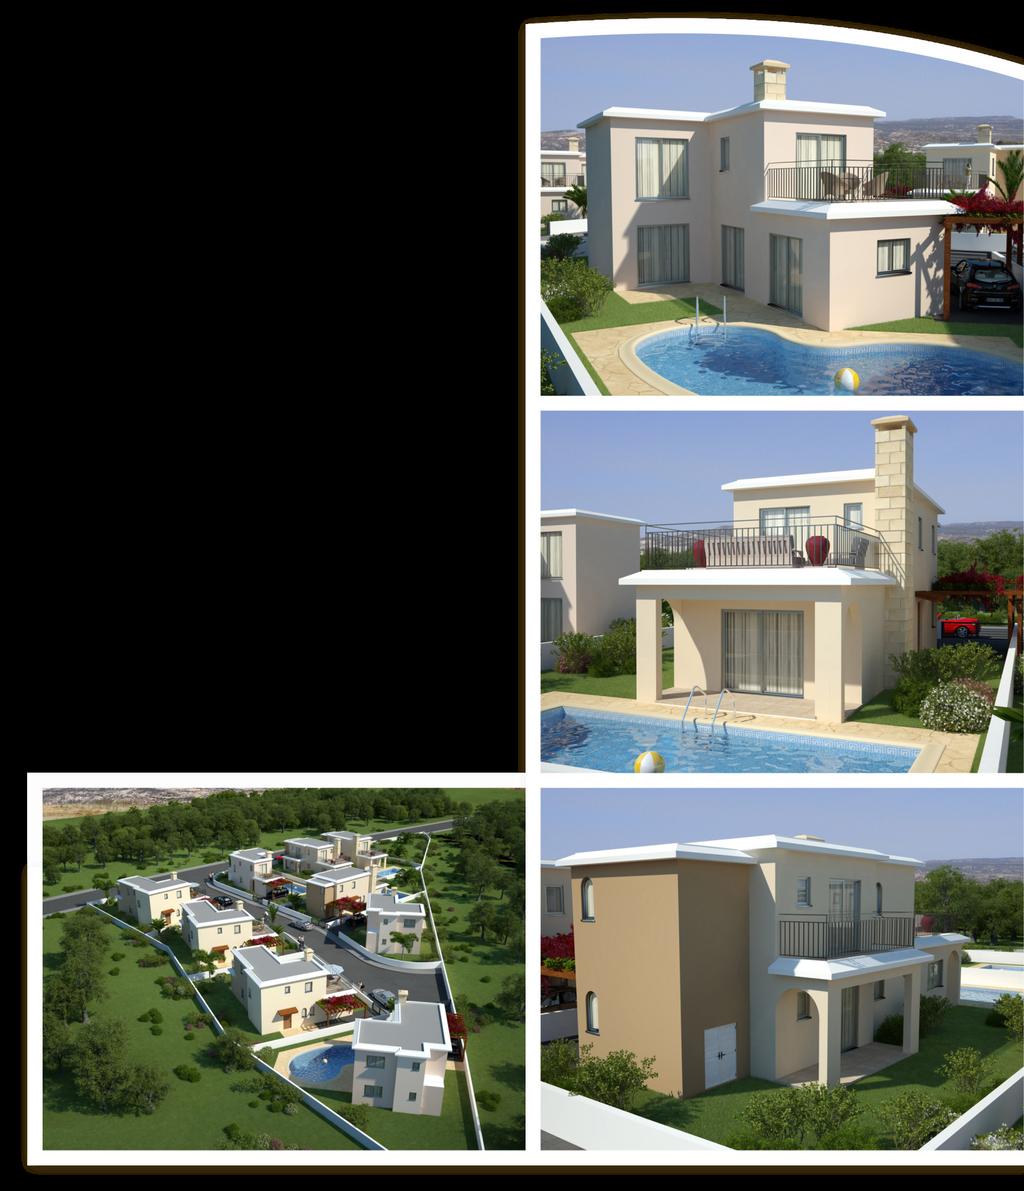 AVAILALBE PROPERTIES ANARITA LUXURY VILLAS 2 3 Bedroom Villas, Anarita Village, Pafos Anarita Luxury Villas 2 is a luxurious villa project which comprises 9 exclusive well-presented 3 bedroom villas.